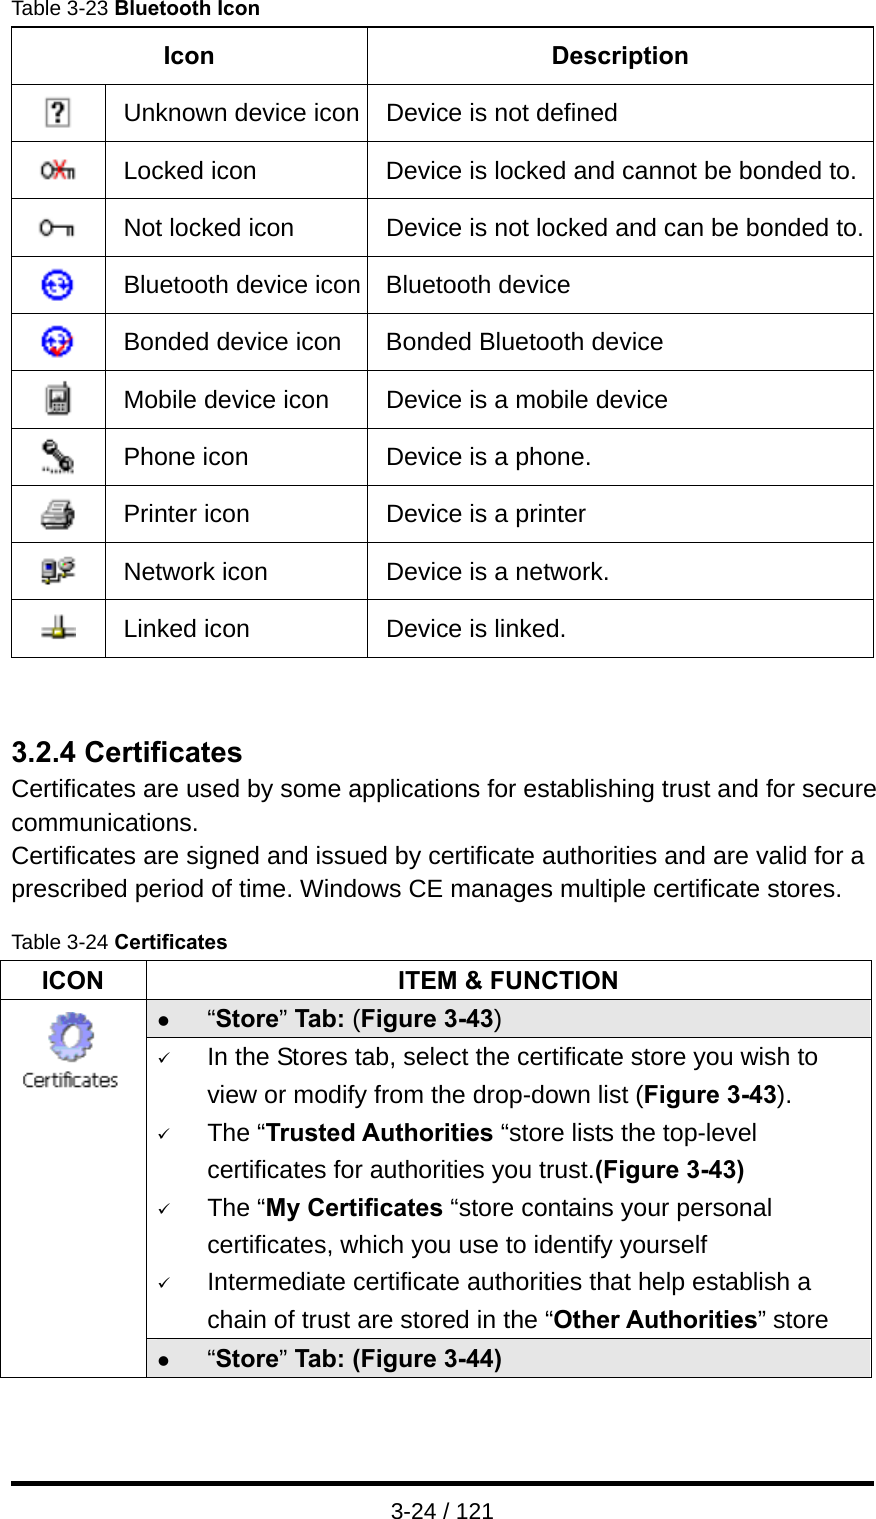  3-24 / 121 Table 3-23 Bluetooth Icon Icon Description  Unknown device icon Device is not defined  Locked icon  Device is locked and cannot be bonded to. Not locked icon  Device is not locked and can be bonded to. Bluetooth device icon Bluetooth device  Bonded device icon  Bonded Bluetooth device  Mobile device icon  Device is a mobile device  Phone icon  Device is a phone.  Printer icon  Device is a printer  Network icon  Device is a network.  Linked icon  Device is linked.   3.2.4 Certificates Certificates are used by some applications for establishing trust and for secure communications. Certificates are signed and issued by certificate authorities and are valid for a prescribed period of time. Windows CE manages multiple certificate stores.  Table 3-24 Certificates ICON  ITEM &amp; FUNCTION z “Store” Tab: (Figure 3-43) 9 In the Stores tab, select the certificate store you wish to view or modify from the drop-down list (Figure 3-43).   9 The “Trusted Authorities “store lists the top-level certificates for authorities you trust.(Figure 3-43) 9 The “My Certificates “store contains your personal certificates, which you use to identify yourself 9 Intermediate certificate authorities that help establish a chain of trust are stored in the “Other Authorities” store  z “Store” Tab: (Figure 3-44) 